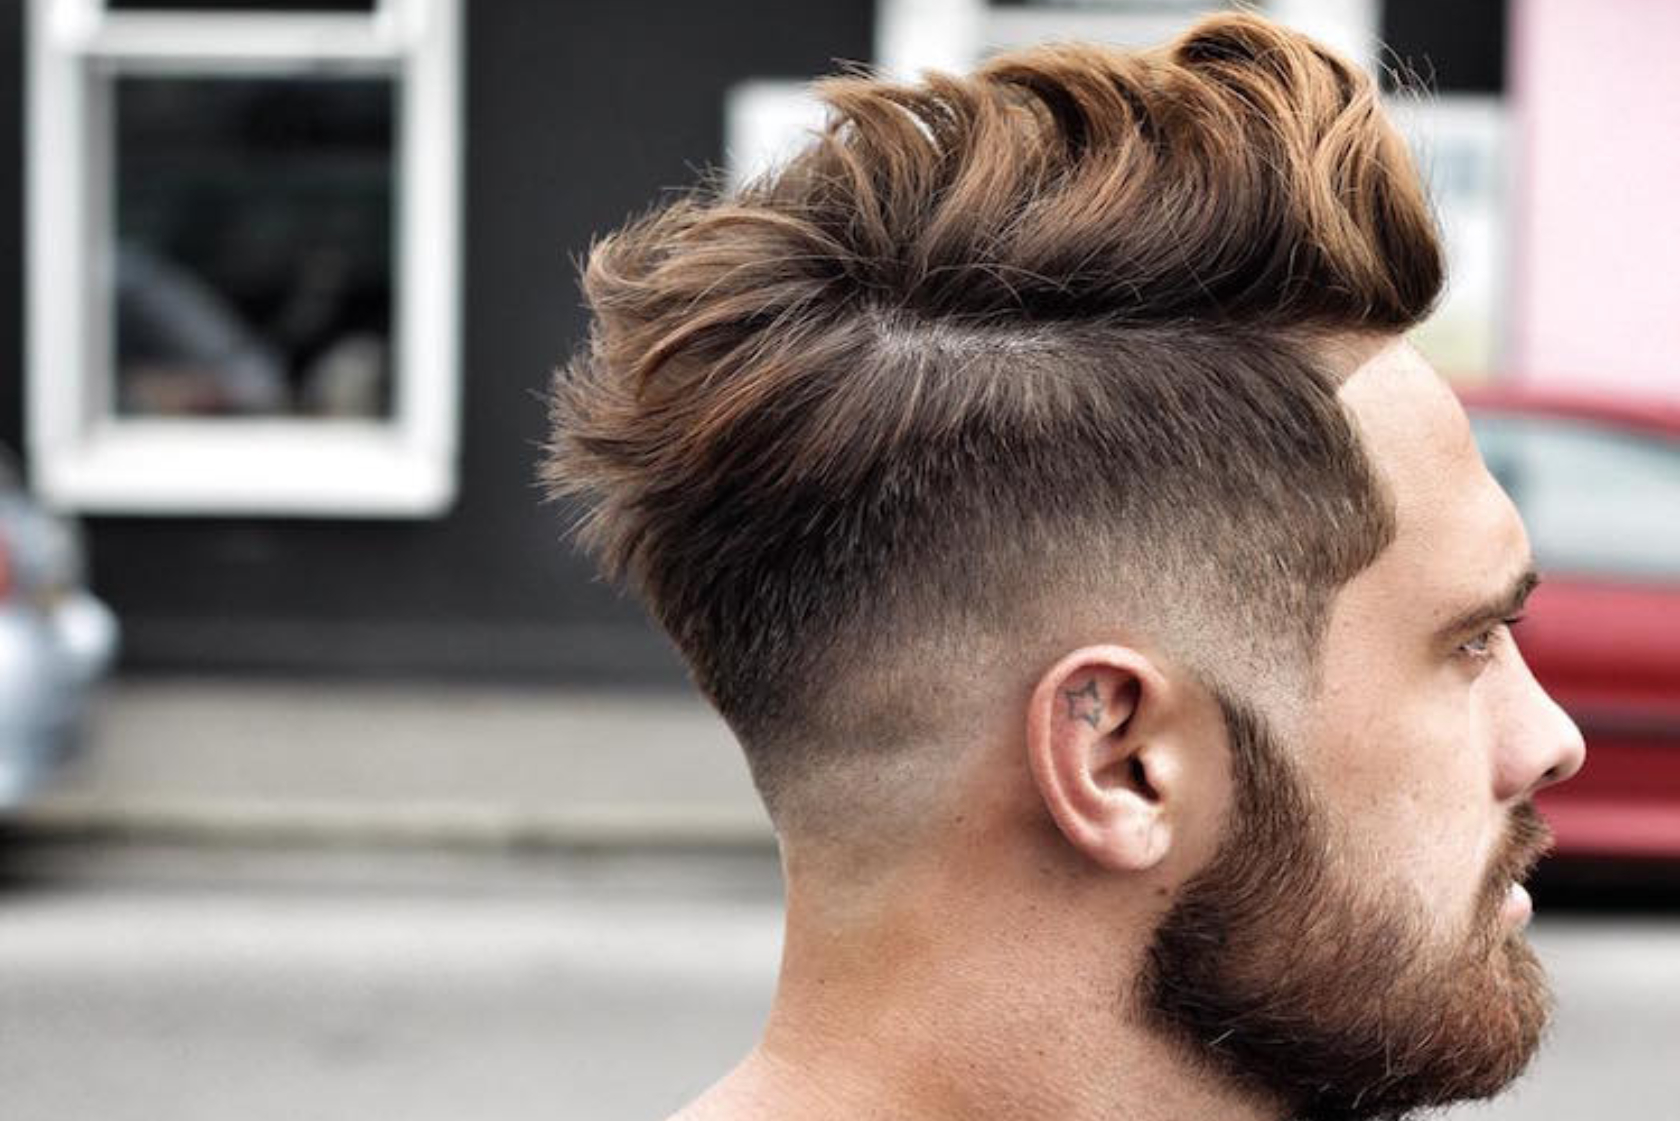 Best Faux Hawk Haircut 2023: TOP 10 Men's Hairstyles Right Now